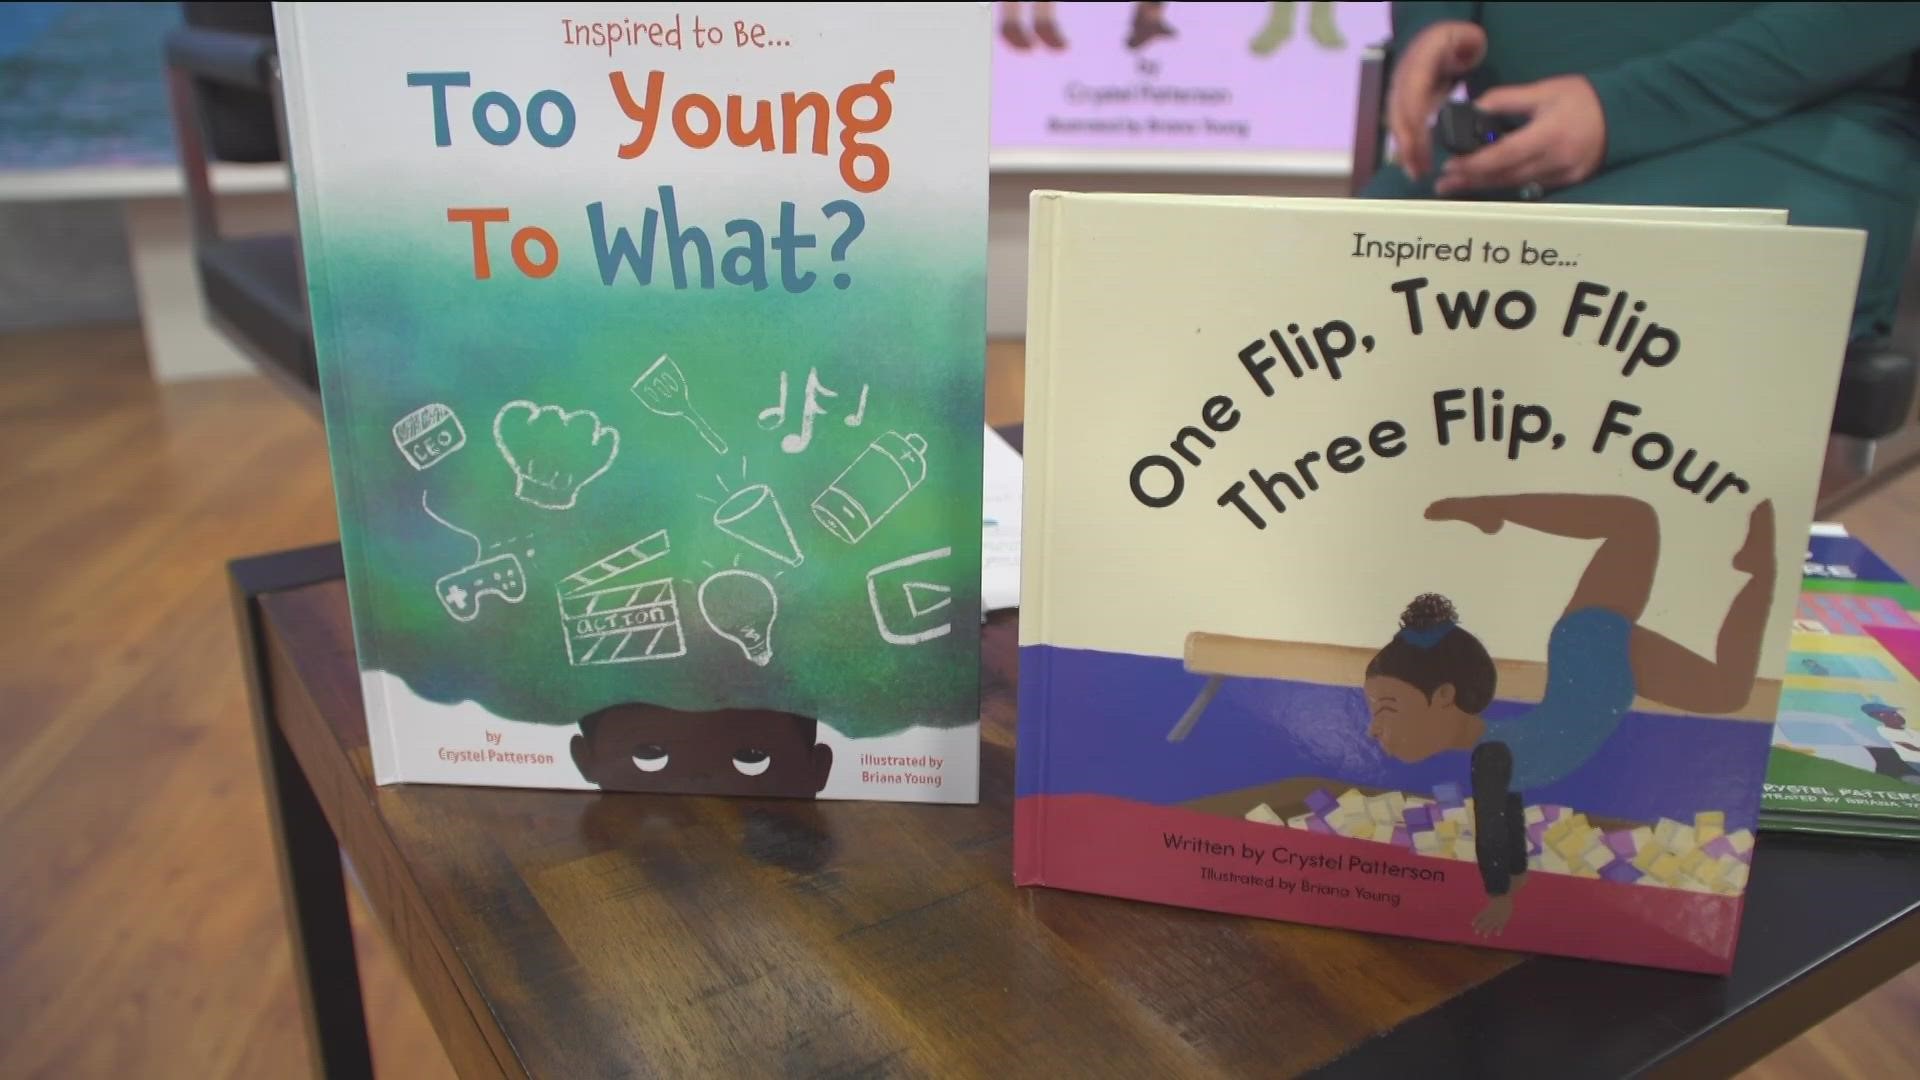 Children's author Crystel Patterson created a book series called "Inspired to be" that addresses how to start conversations with kids about diversity.